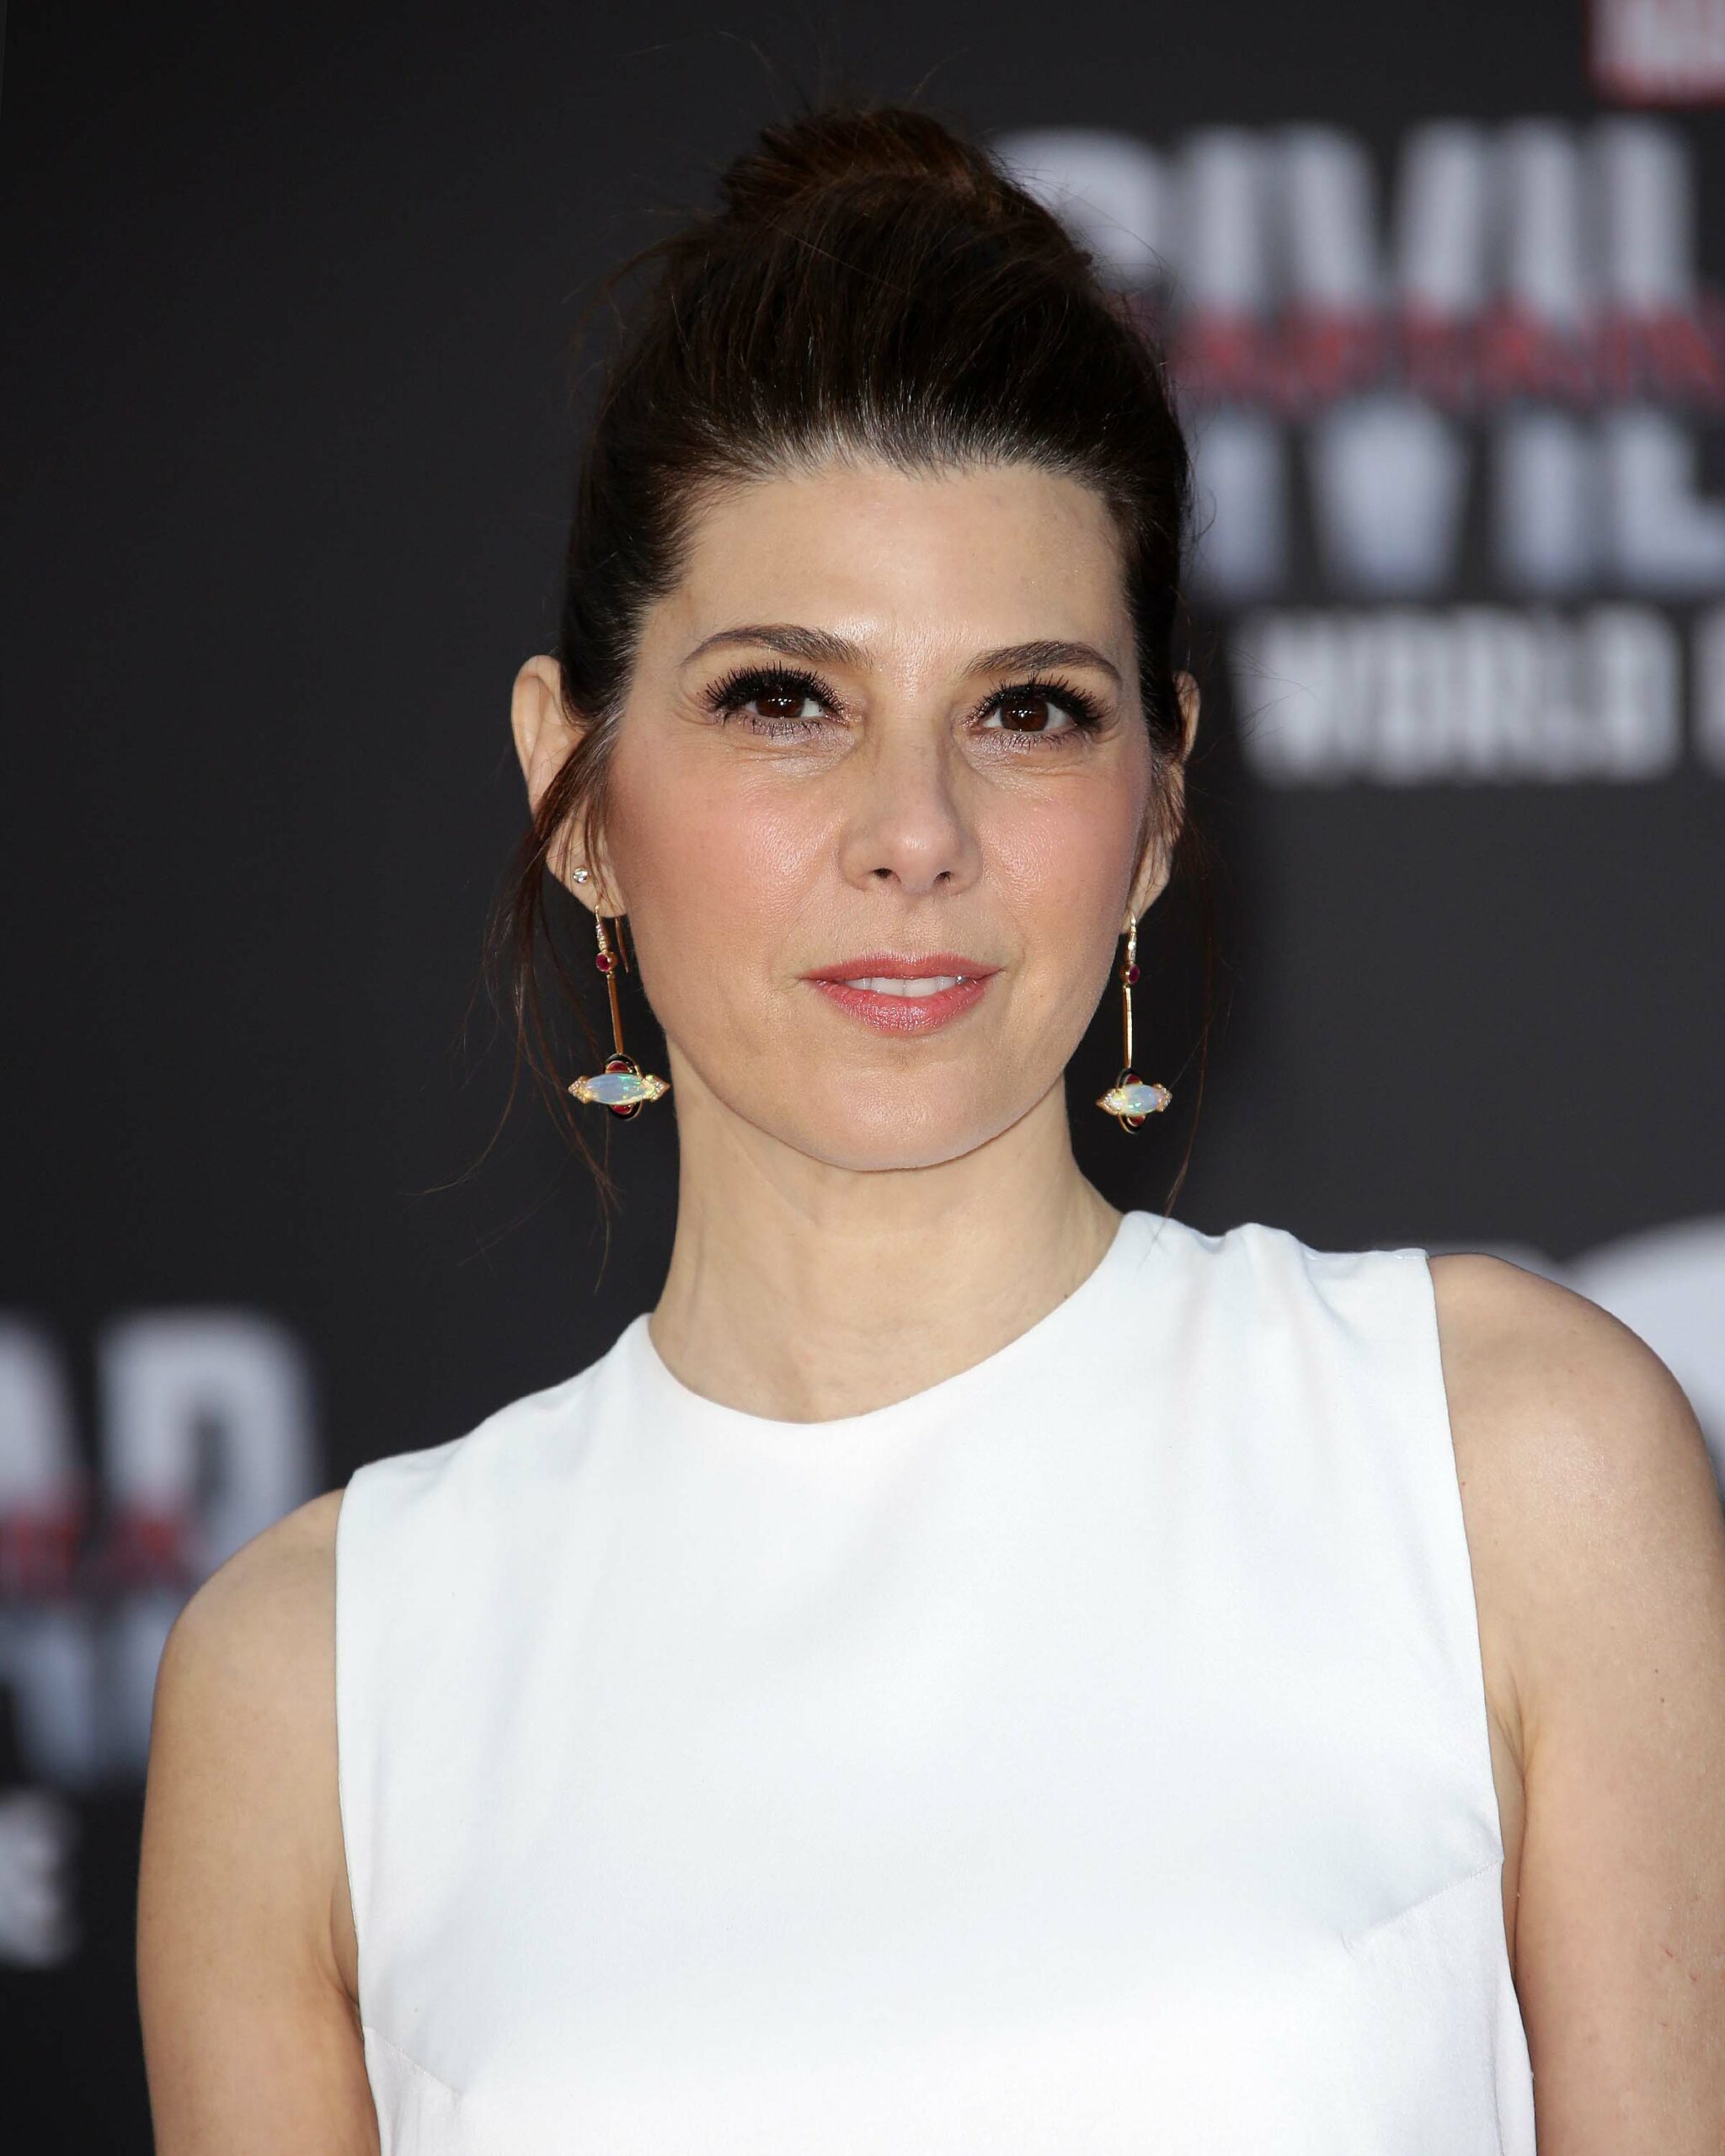 Marisa Tomei Age Married Husband Movies Net Worth 2020.